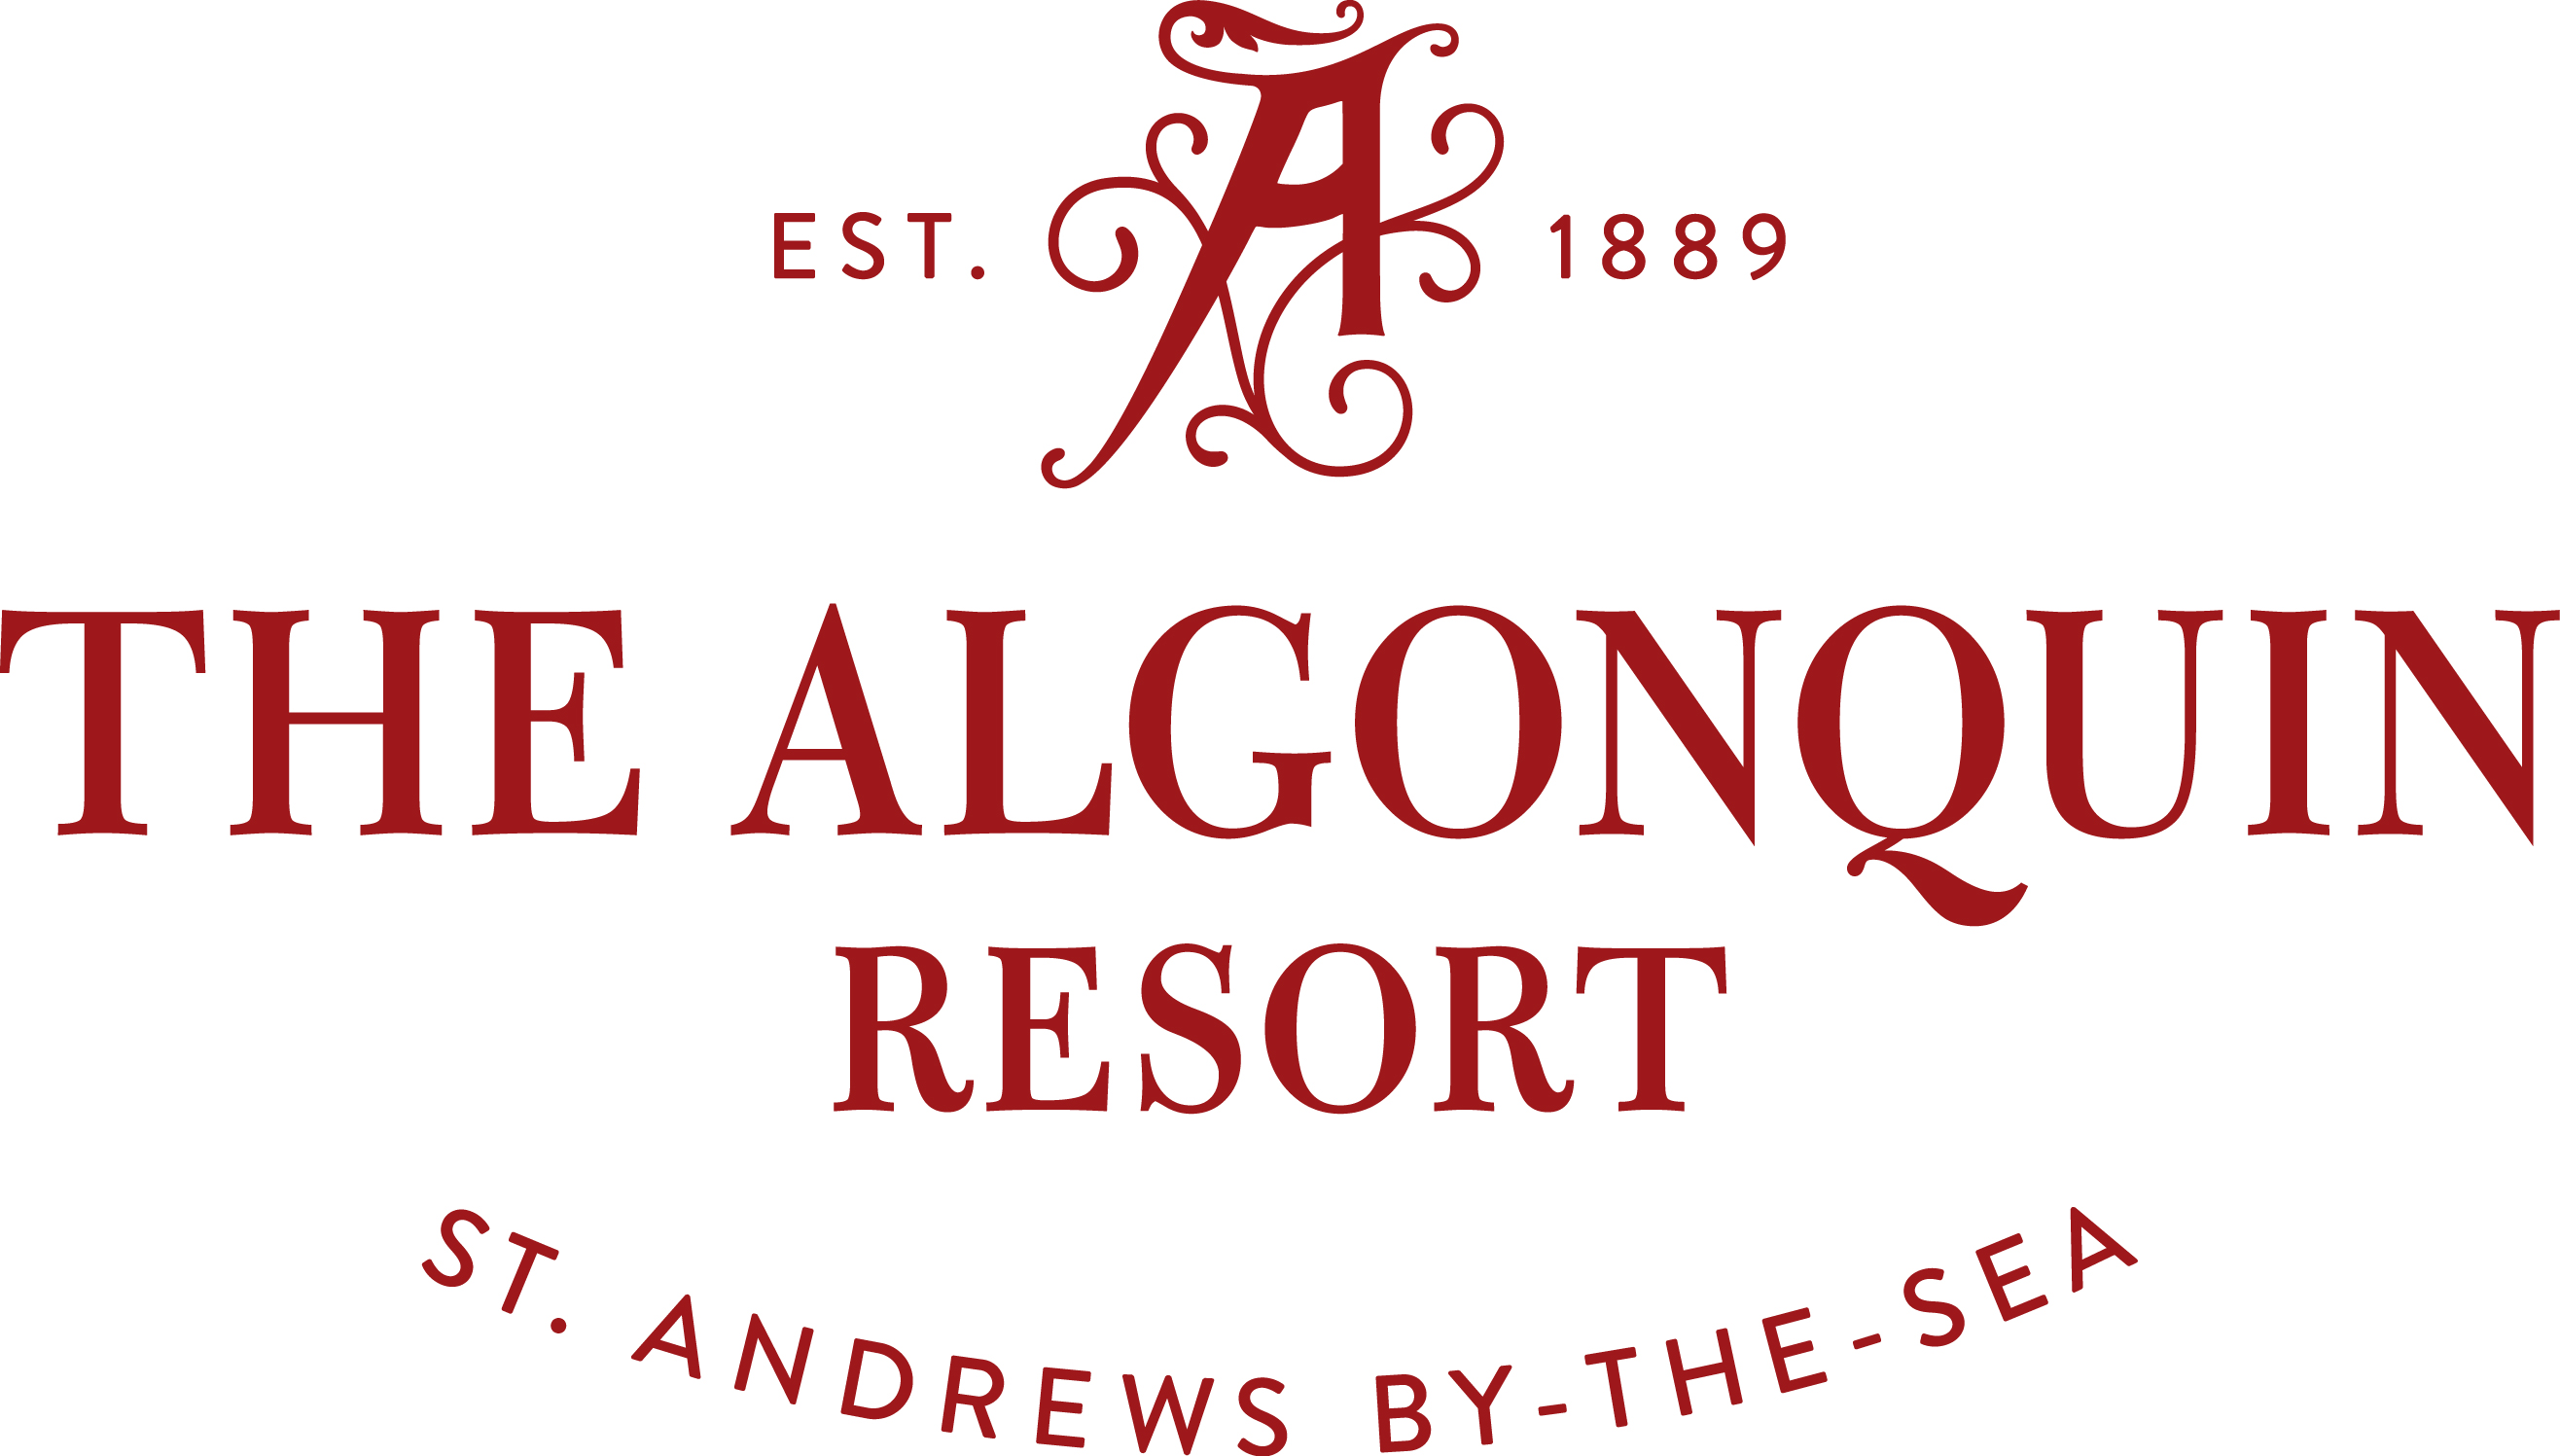 iLuxury Awards - The Algonquin Resort, St Andrews By-the-Sea